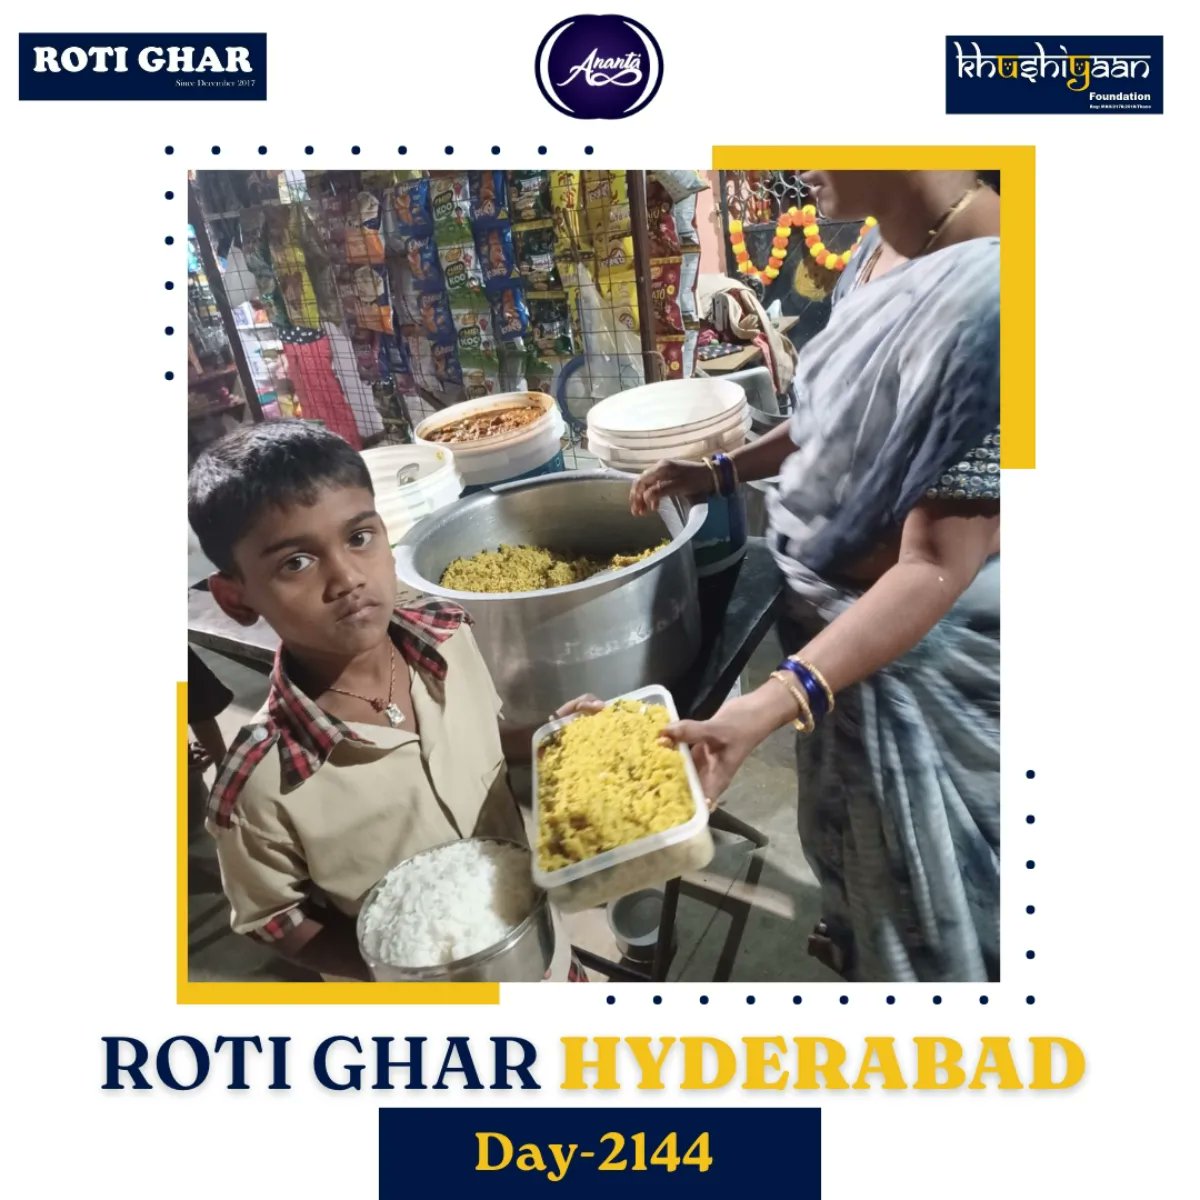 Date : 28-10-2023 Location : Delhi Valsad Hyderabad Odisha Roti Ghar : Day 2144 'The highest of distinctions is service to others' Be kind to everyone and spread happiness across! . #upliftingsociety #helpingothers #feedingkids #hungerfree #Hungerfreeindia #Kidsofrotighar